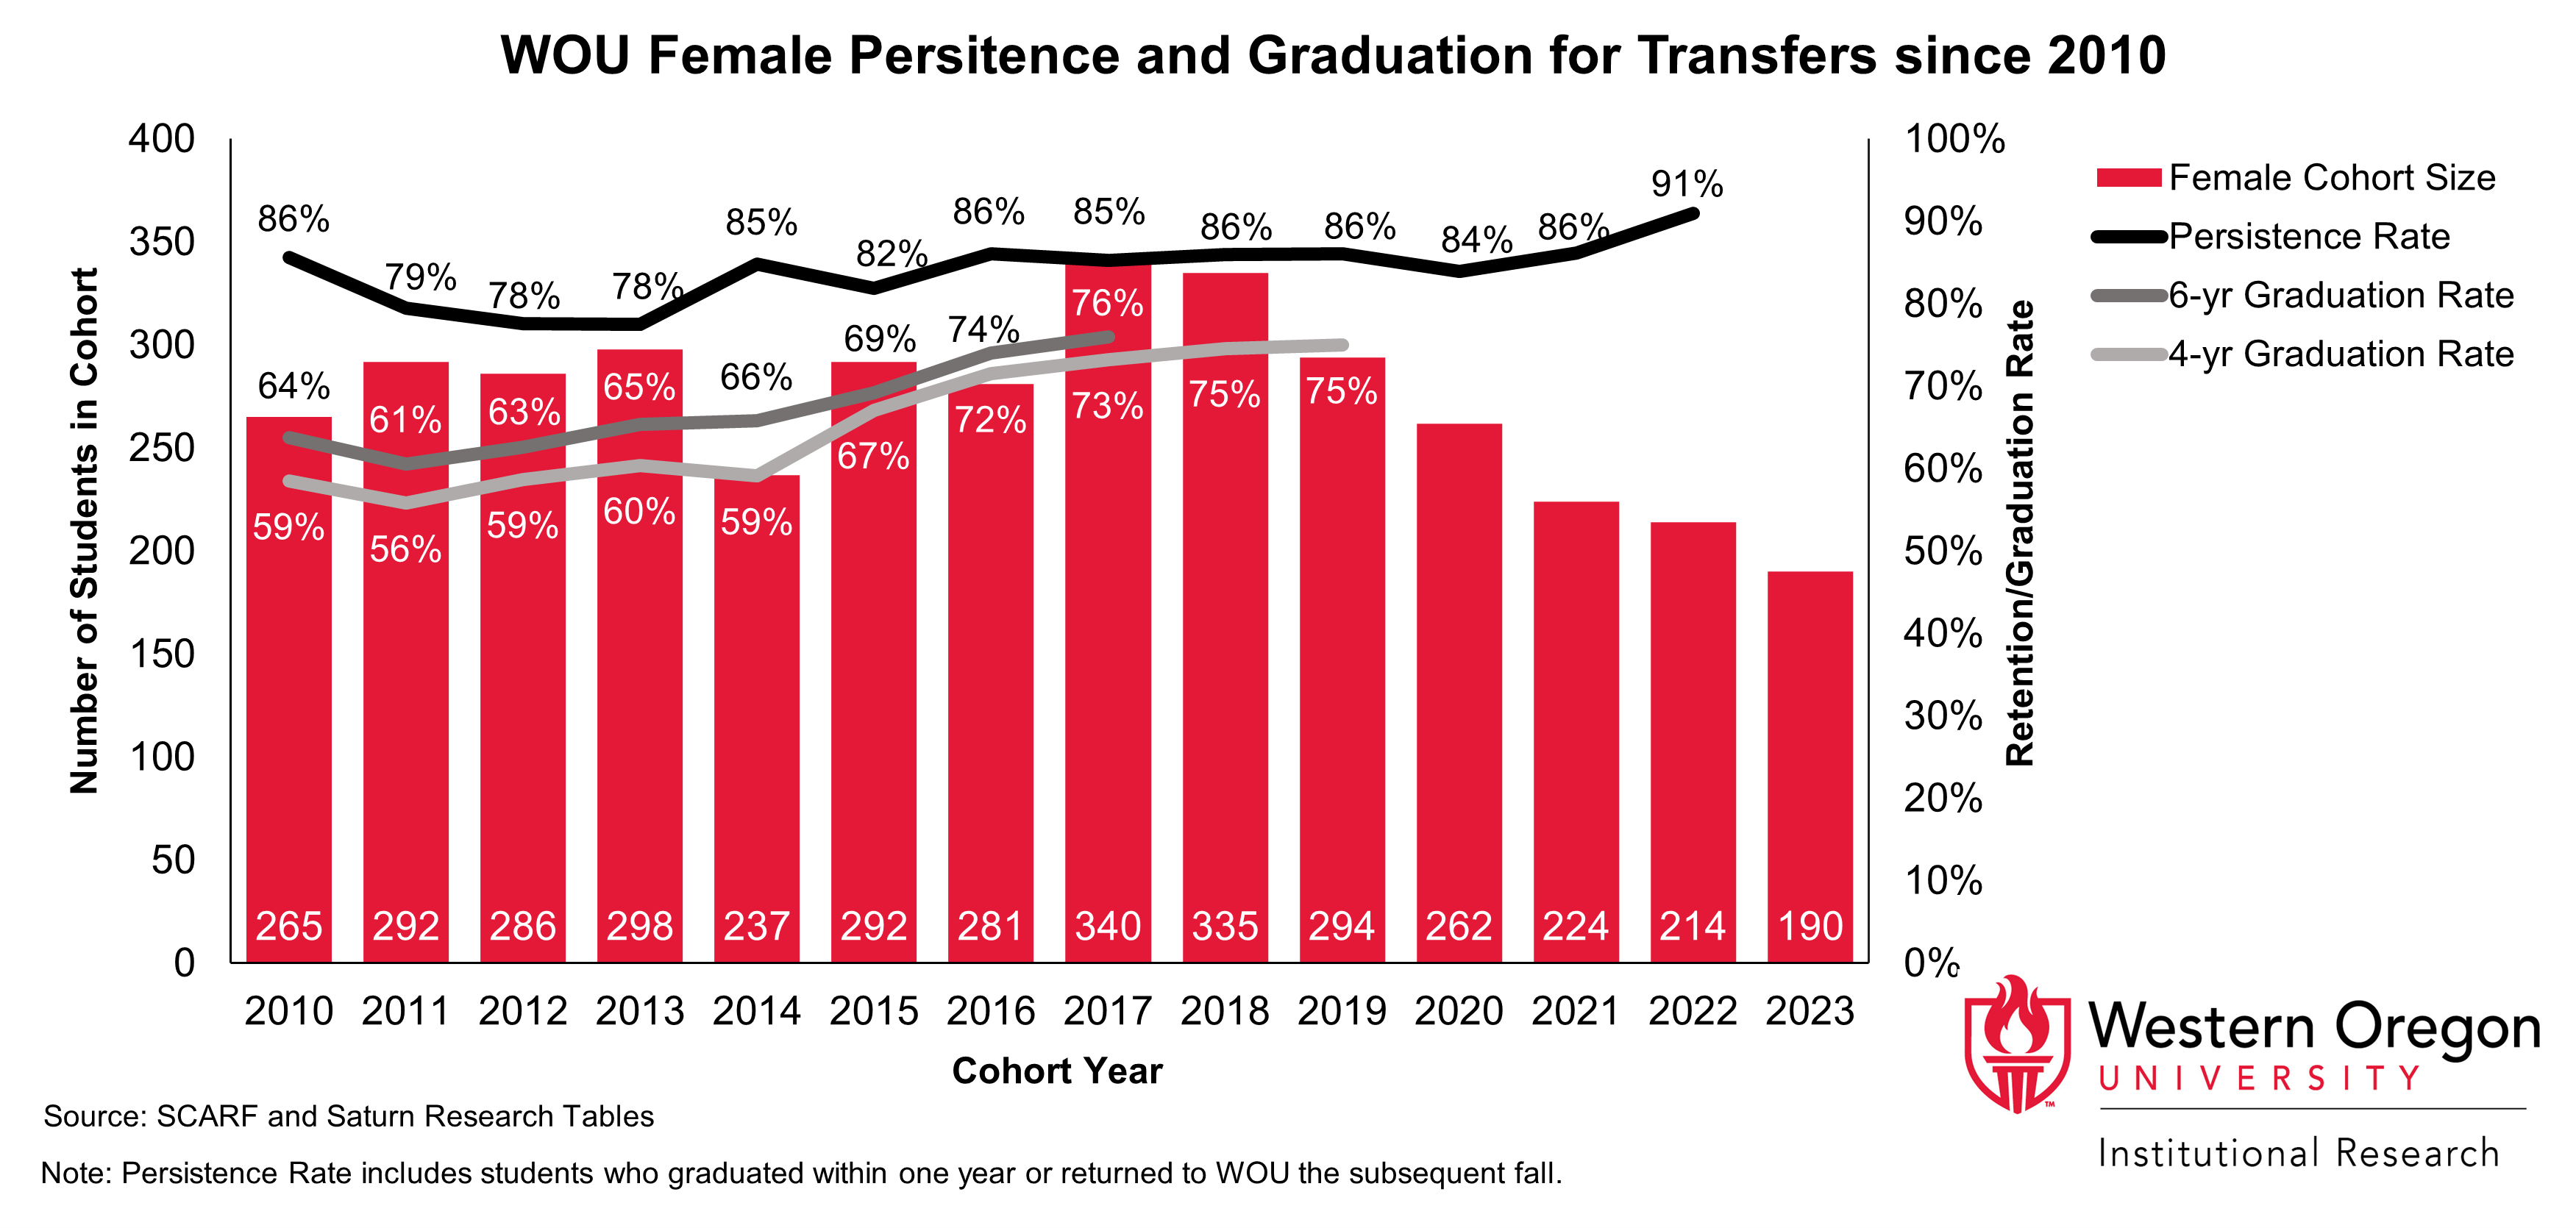 Bar and line graph of retention and 4- and 6-year graduation rates since 2010 for WOU transfer students that are female, showing that graduation and retention rates have increased overall.